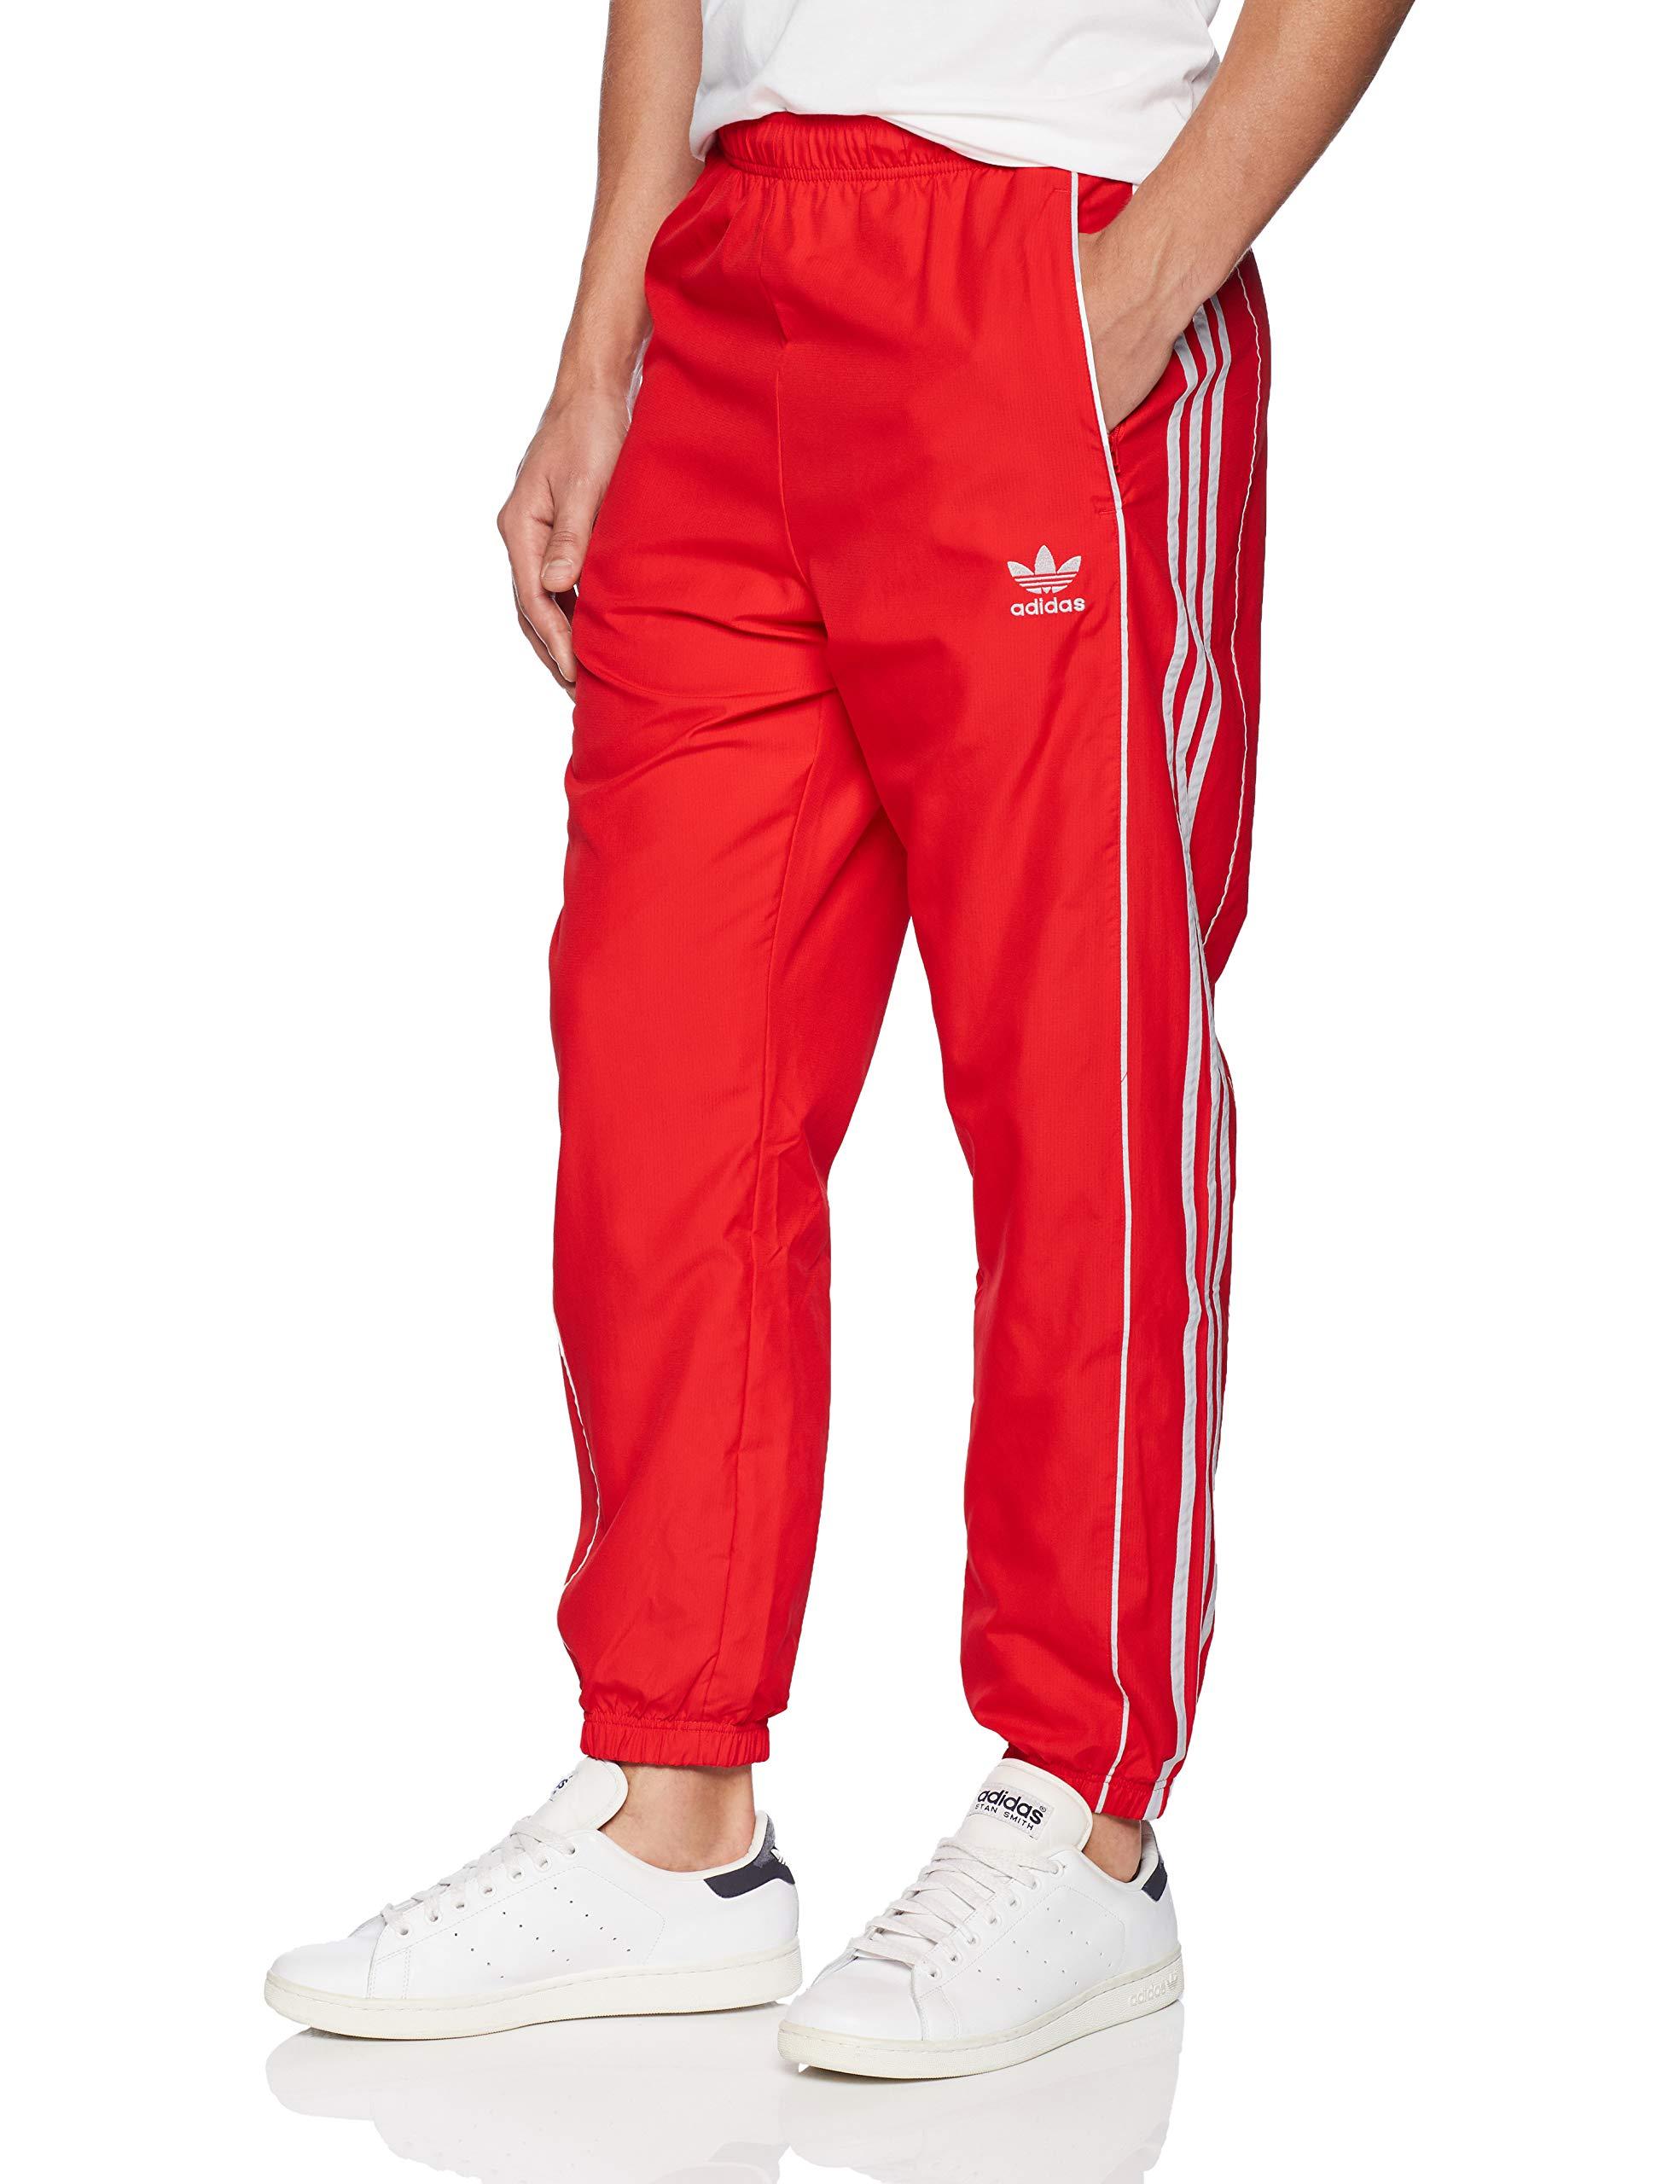 adidas Originals Authentics Piped Wind Pant in Red for Men - Lyst